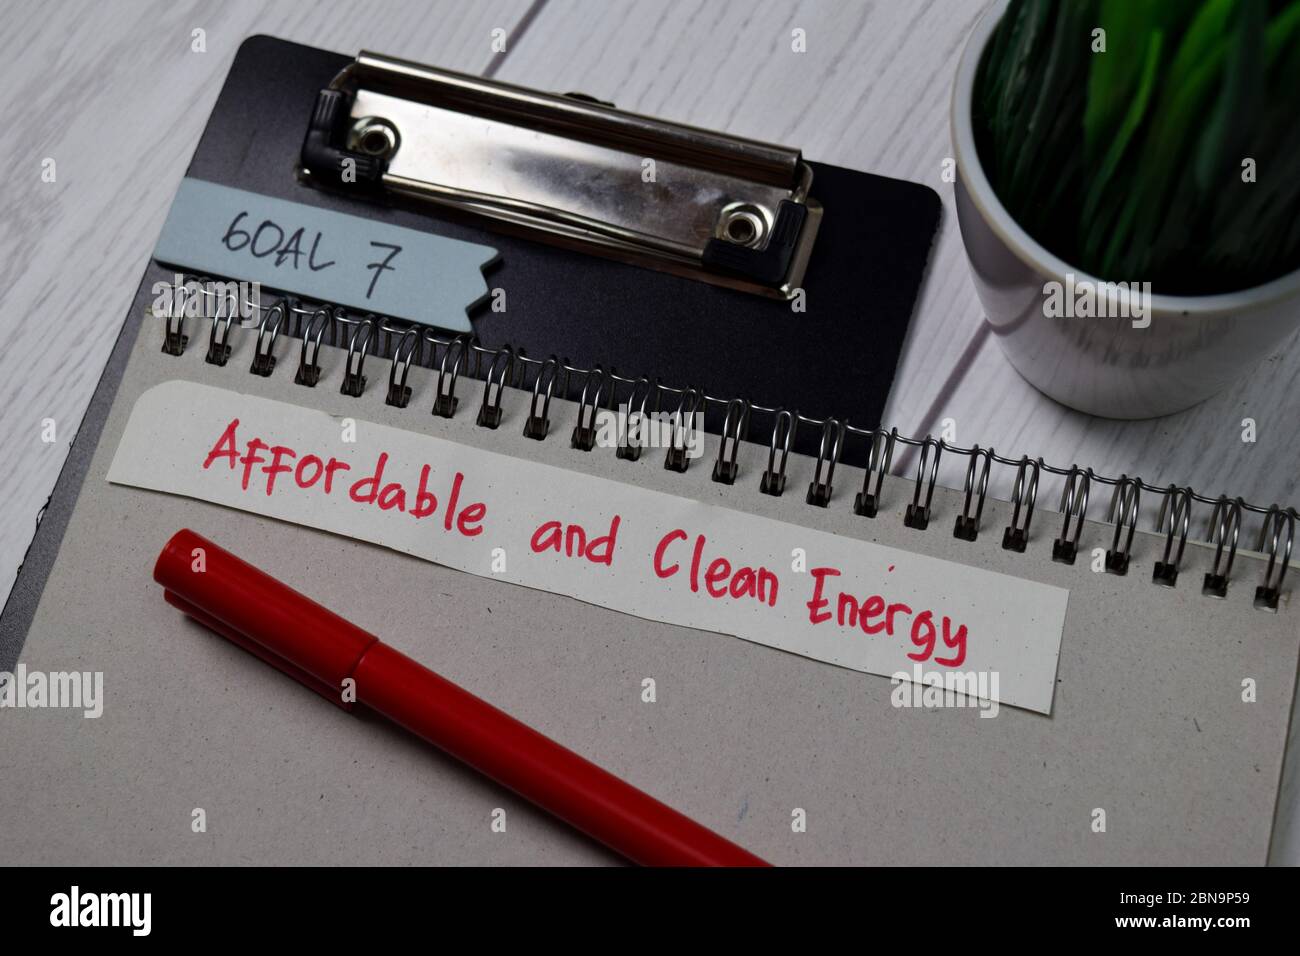 Goal 7 - Affordable and Clean Energy write on sticky notes isolated on office desk Stock Photo